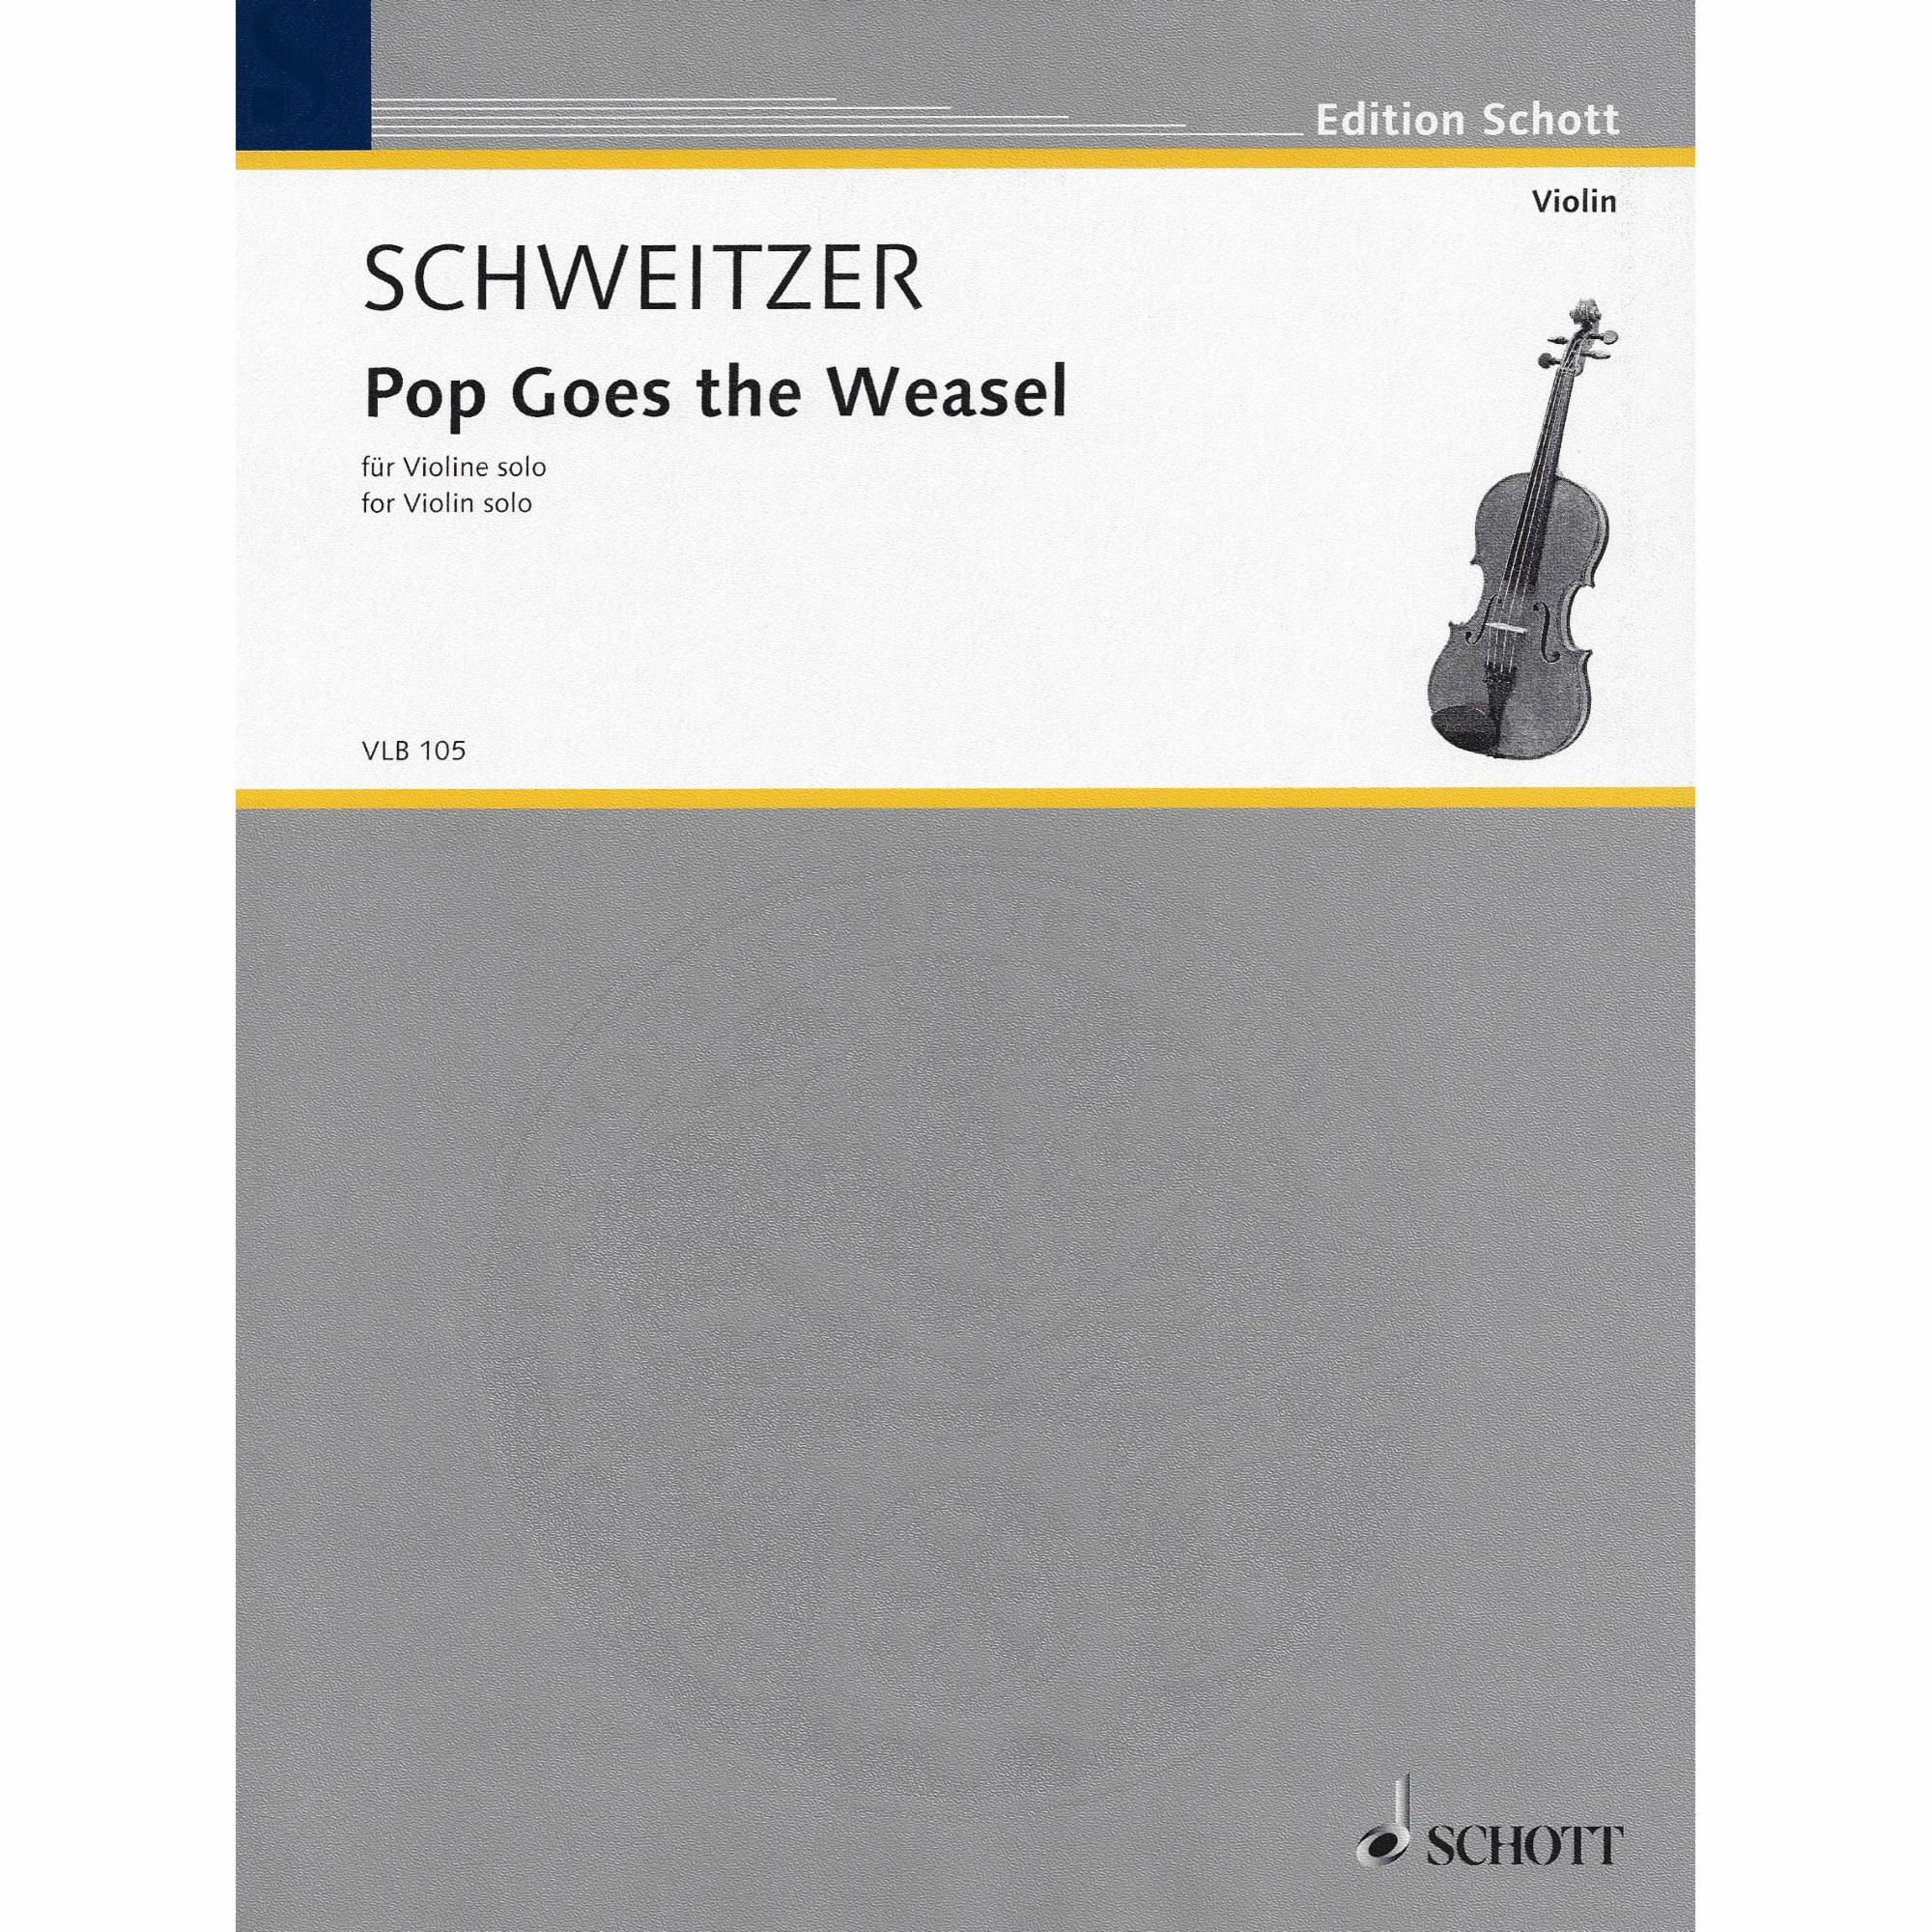 Schweitzer -- Pop Goes the Weasel for Solo Violin